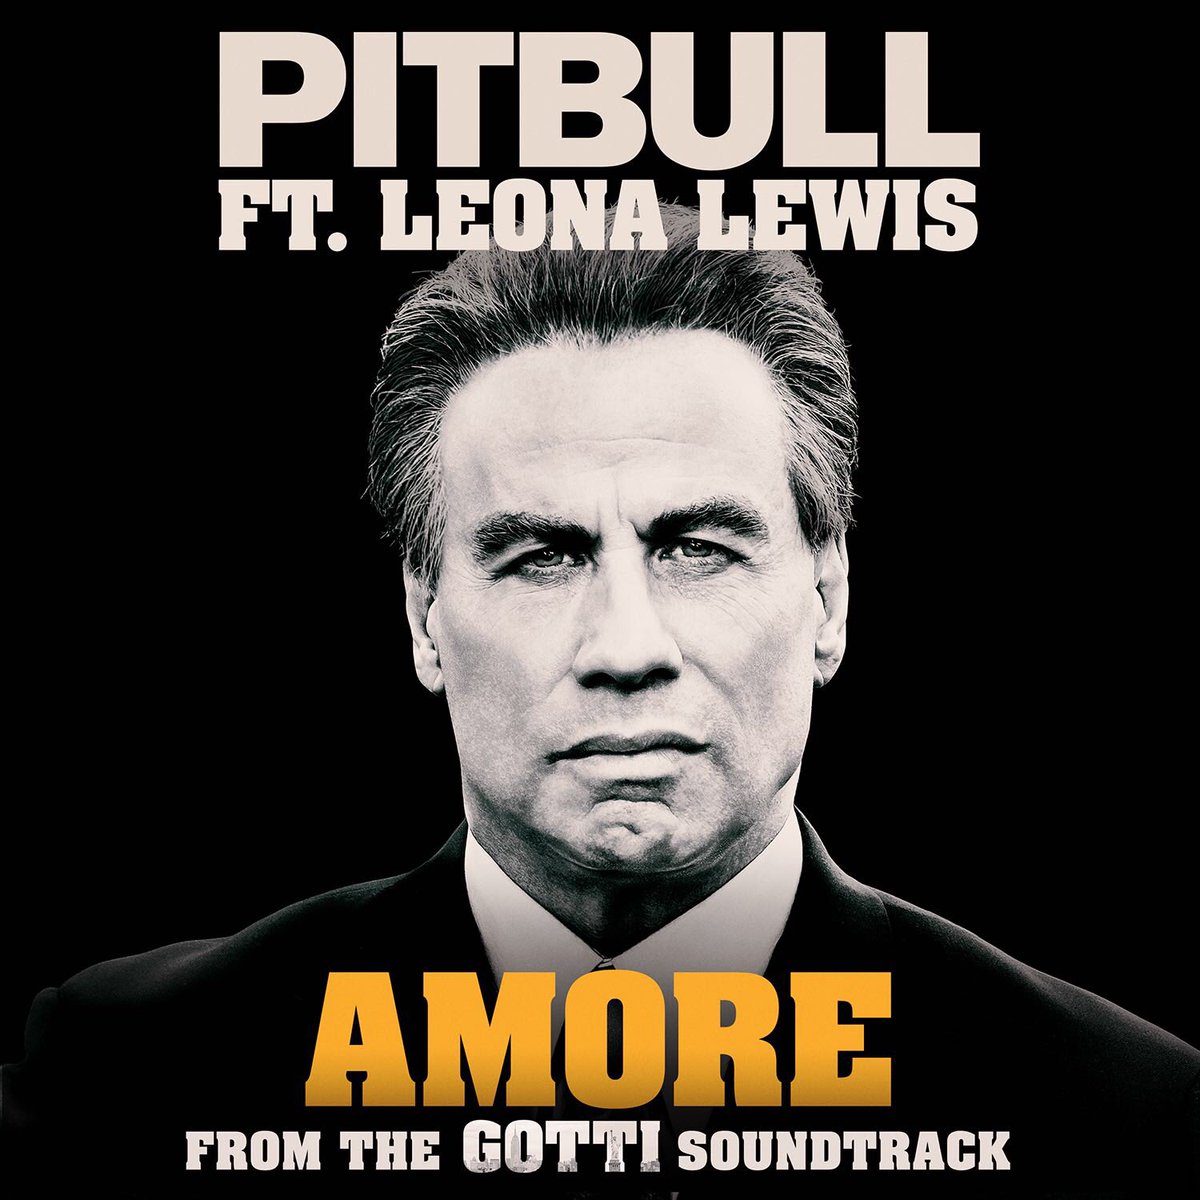 Can’t wait for you to hear song Friday! @pitbull #JohnTravolta #GottiMovie https://t.co/dx7bIT4n5f